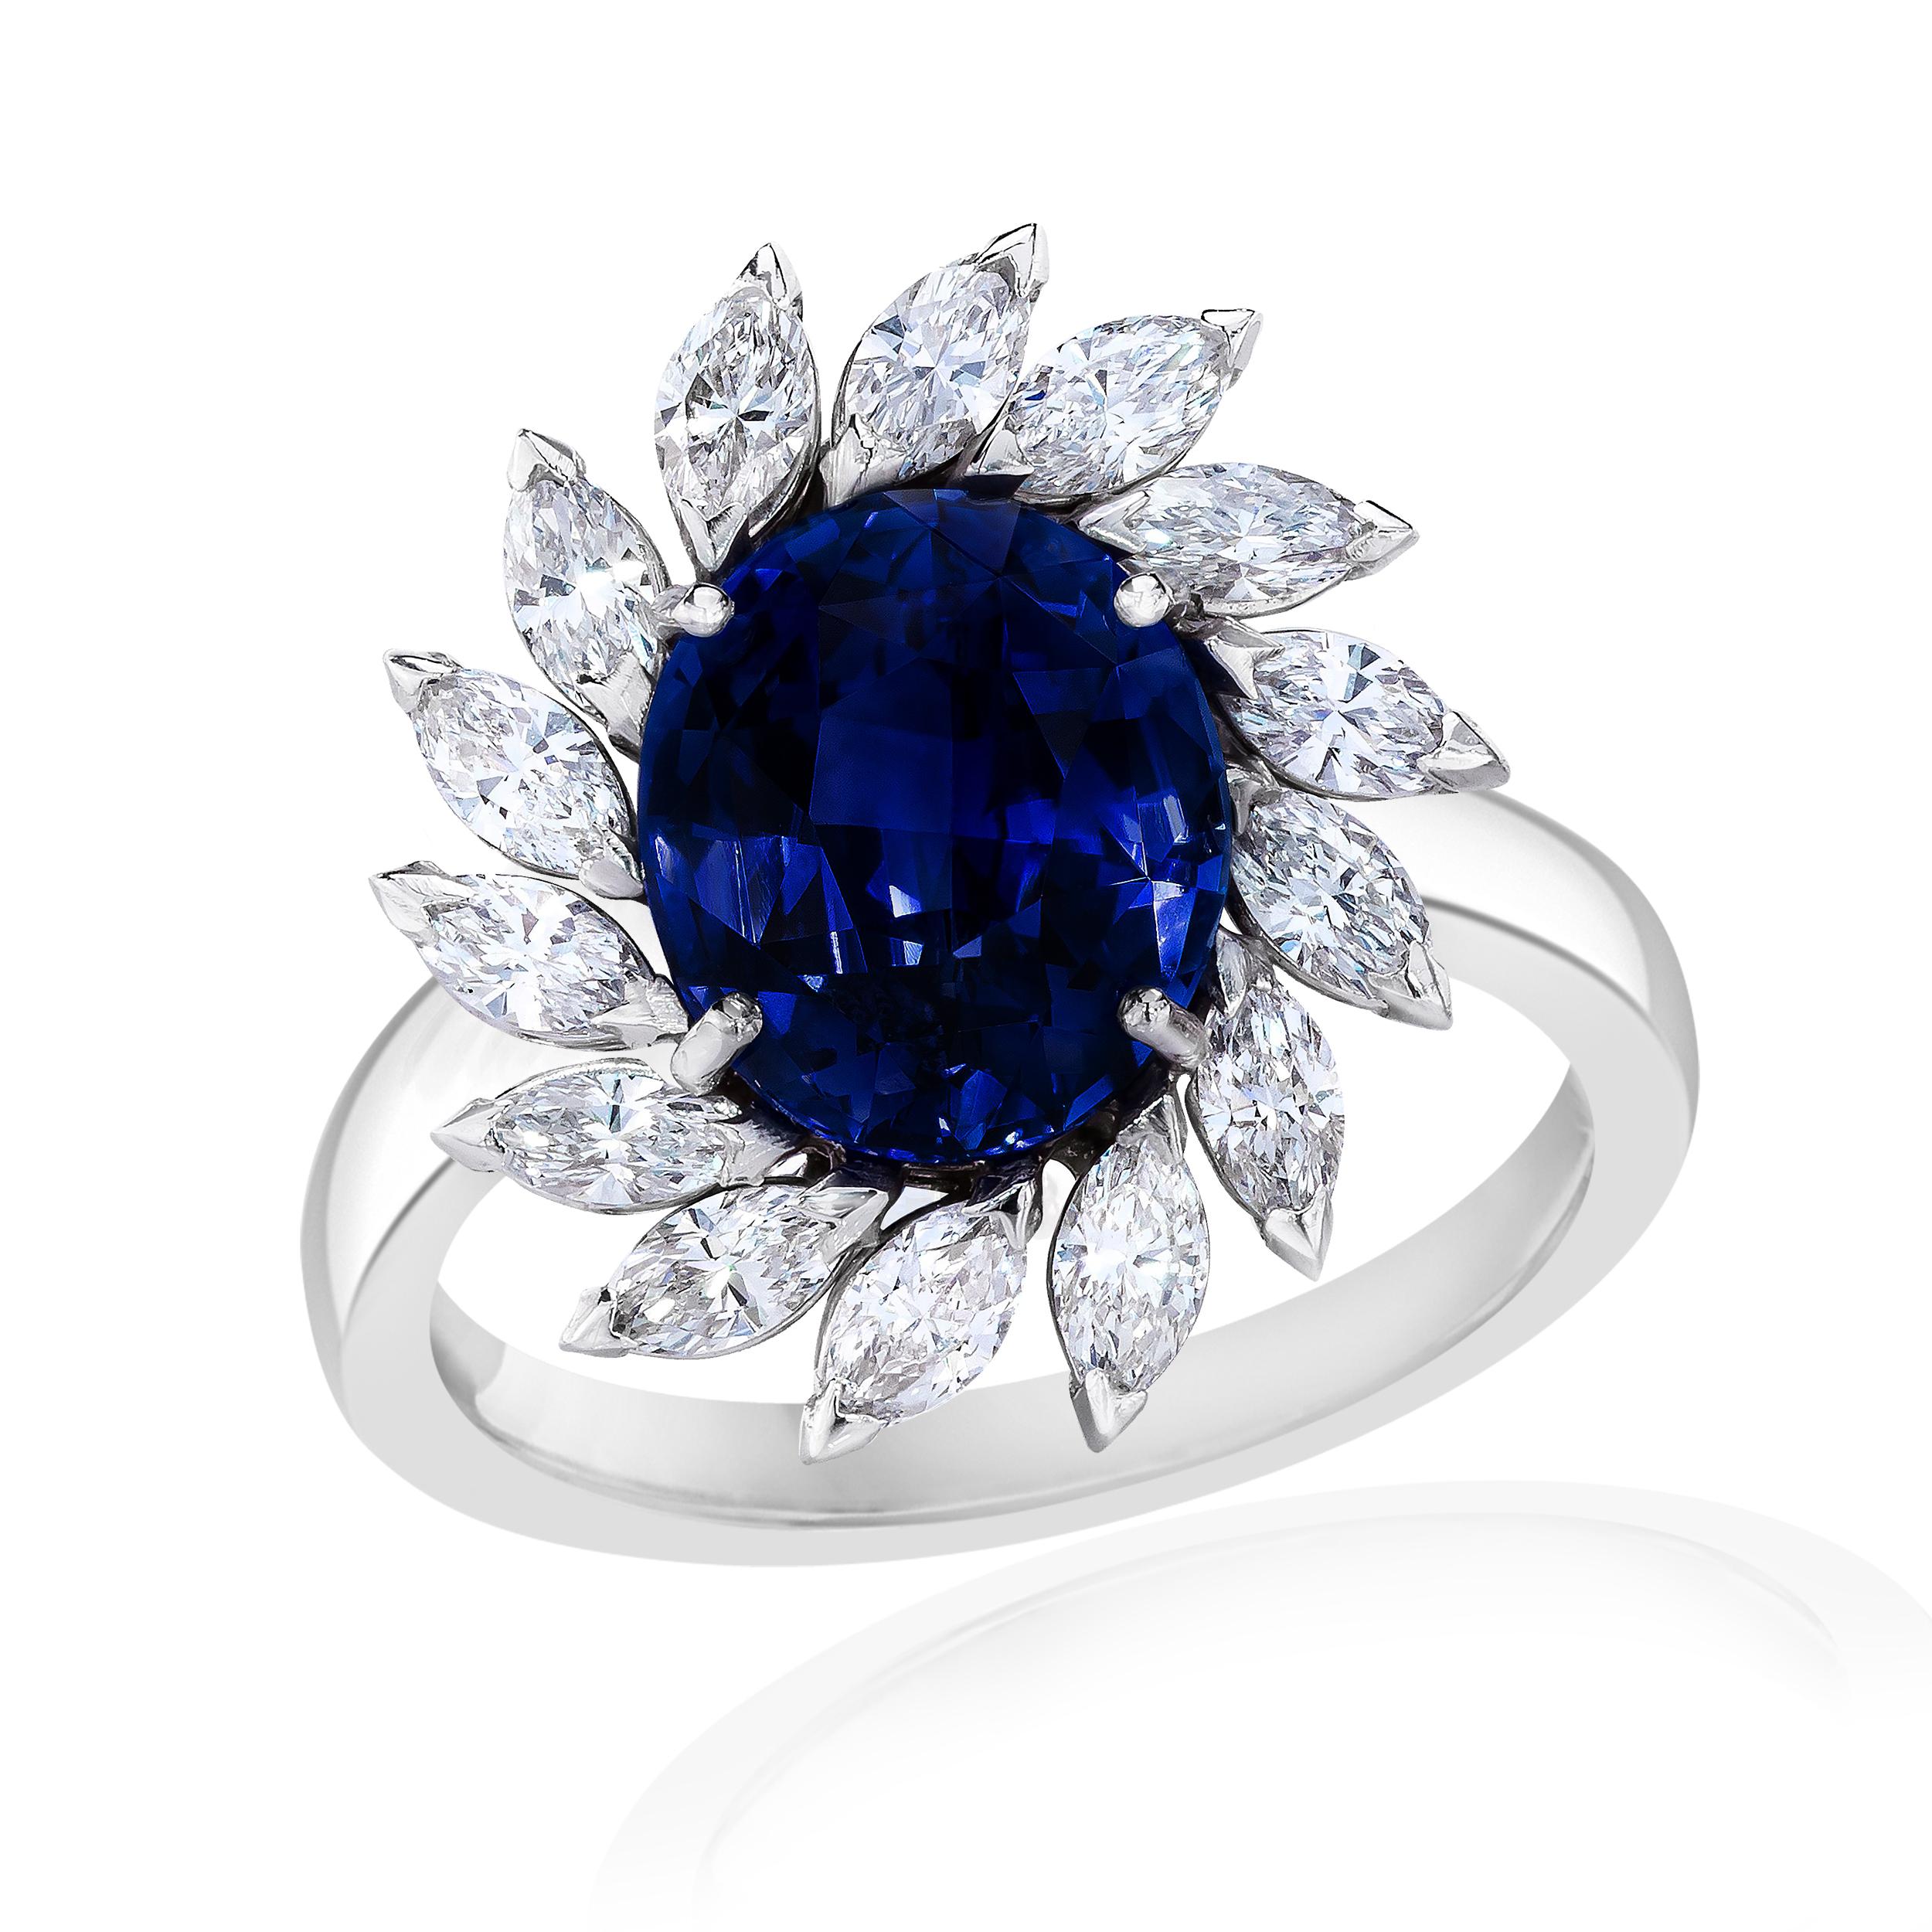 Centered upon a beautiful and rich colored Sapphire weighing approximately 4.50 Carats.
Surrounded by Marquise Cut Diamonds weighing 1.20 Carats.
Set in 18 Karat White Gold.
